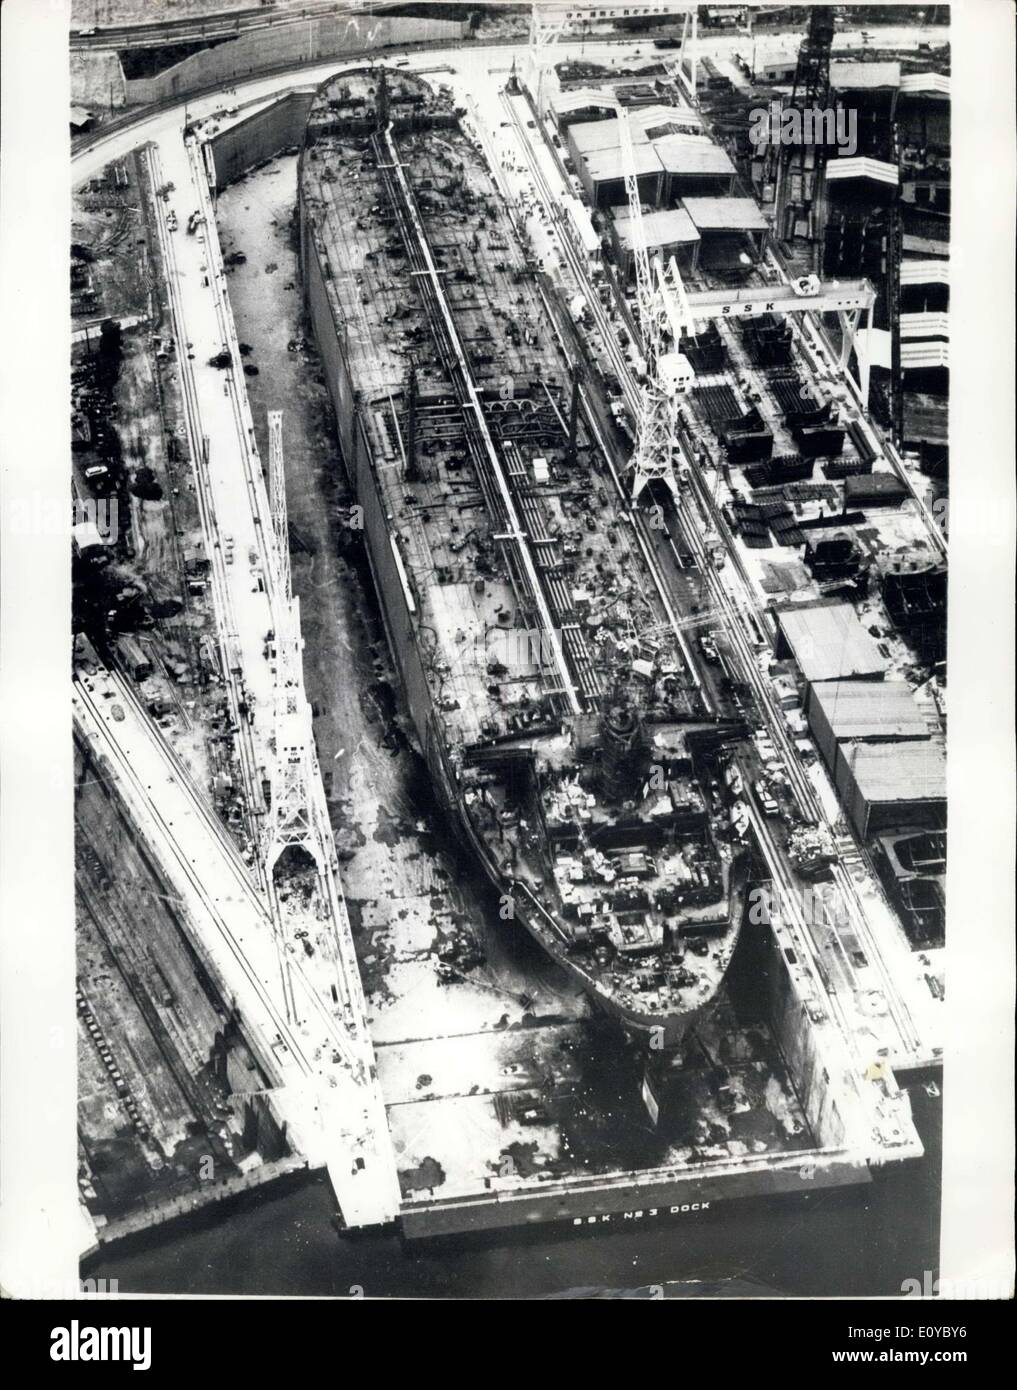 Oct. 20, 1969 - Mammoth Japanese Dock: An aerial view of the 400,000 DWT repair dock in operation at the Sadebo Heavy Idustries, and can accommodate the giant tankers now afloat. The dock 370 metres long, 70 metres wide and 15 metres deep, can be flooded in 2.5 hours. The dock gates are bottom-hinged falling by gravity, and rising by power drive wire ropes. Stock Photo